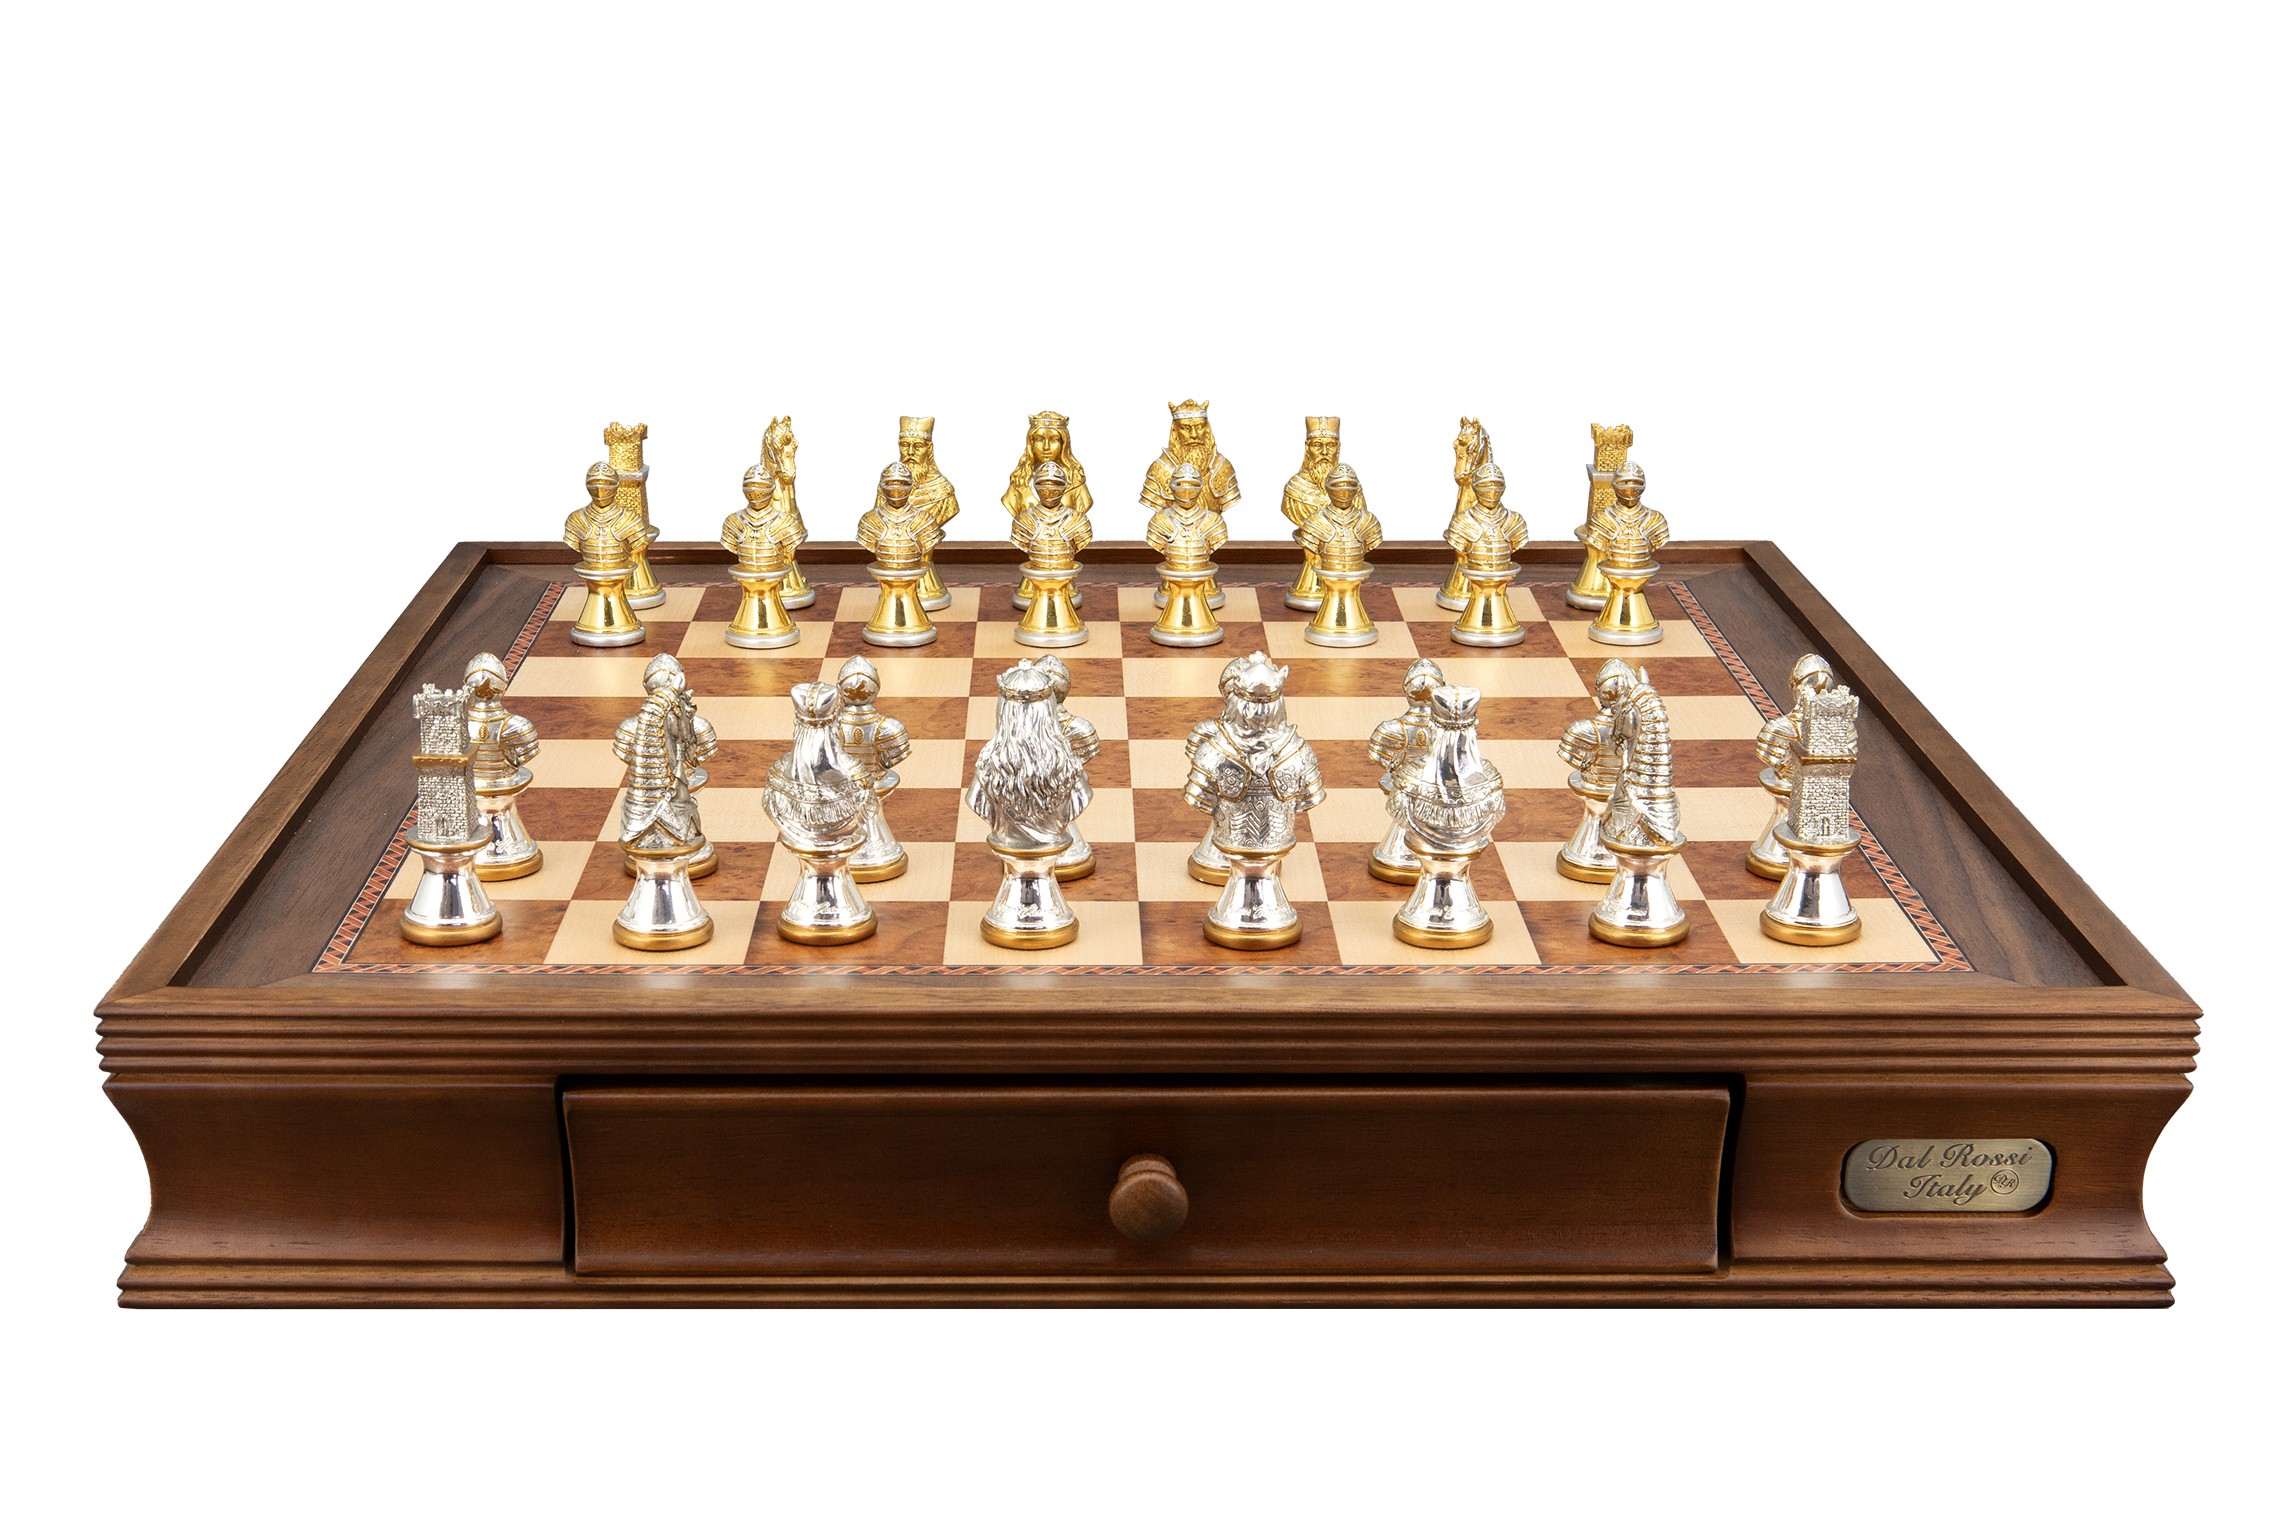 Dal Rossi Medieval Warriors Metal Chessmen 85mm on a Walnut Inlaid Chess Box with Drawers 20"